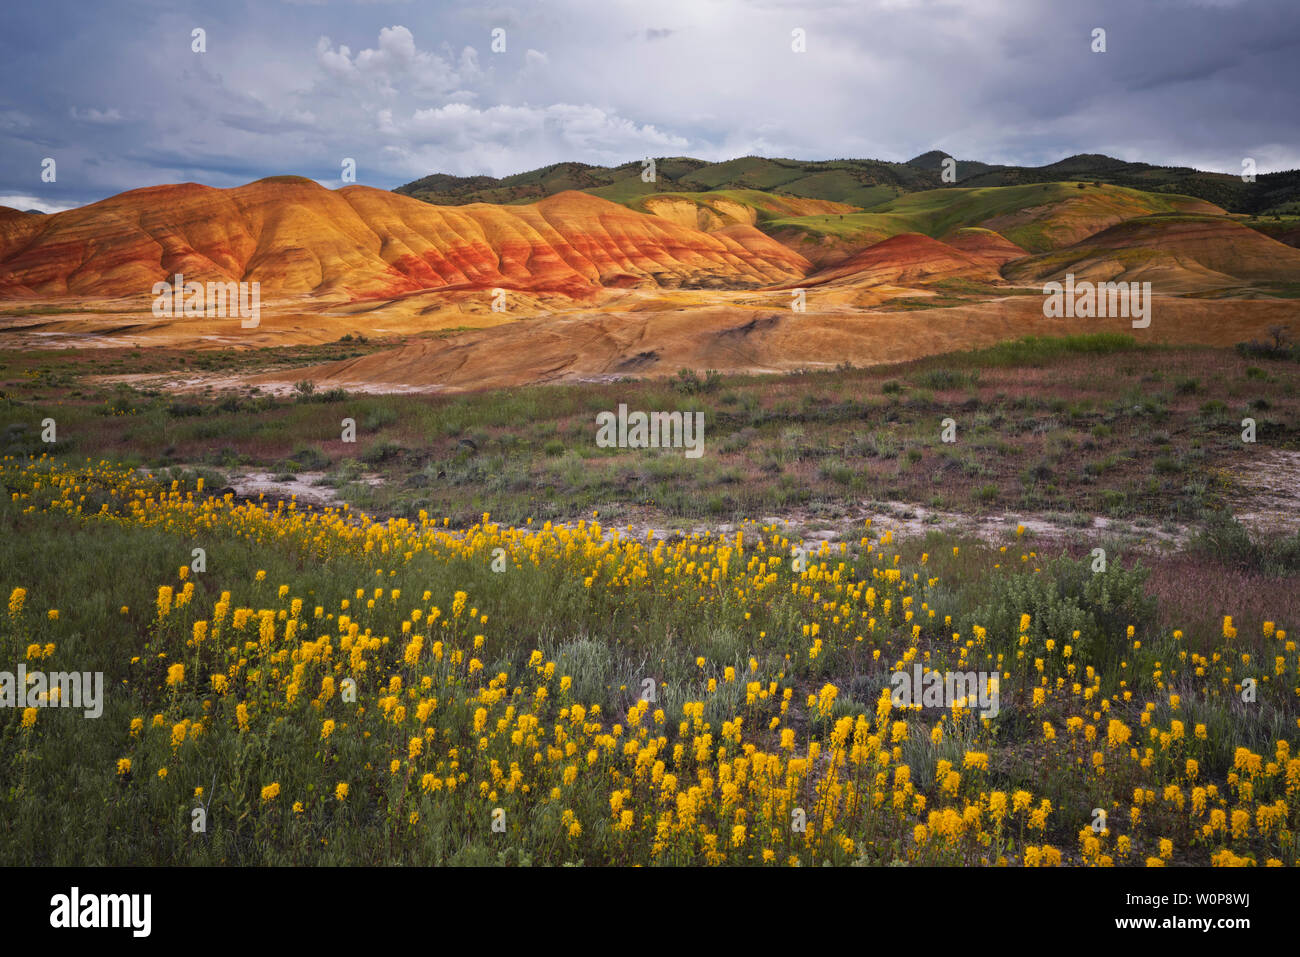 A rare super bloom of spring bee flowers and chaenactis on the slopes of the Painted Hills in central Oregon’s John Day Fossil Beds National Monument. Stock Photo